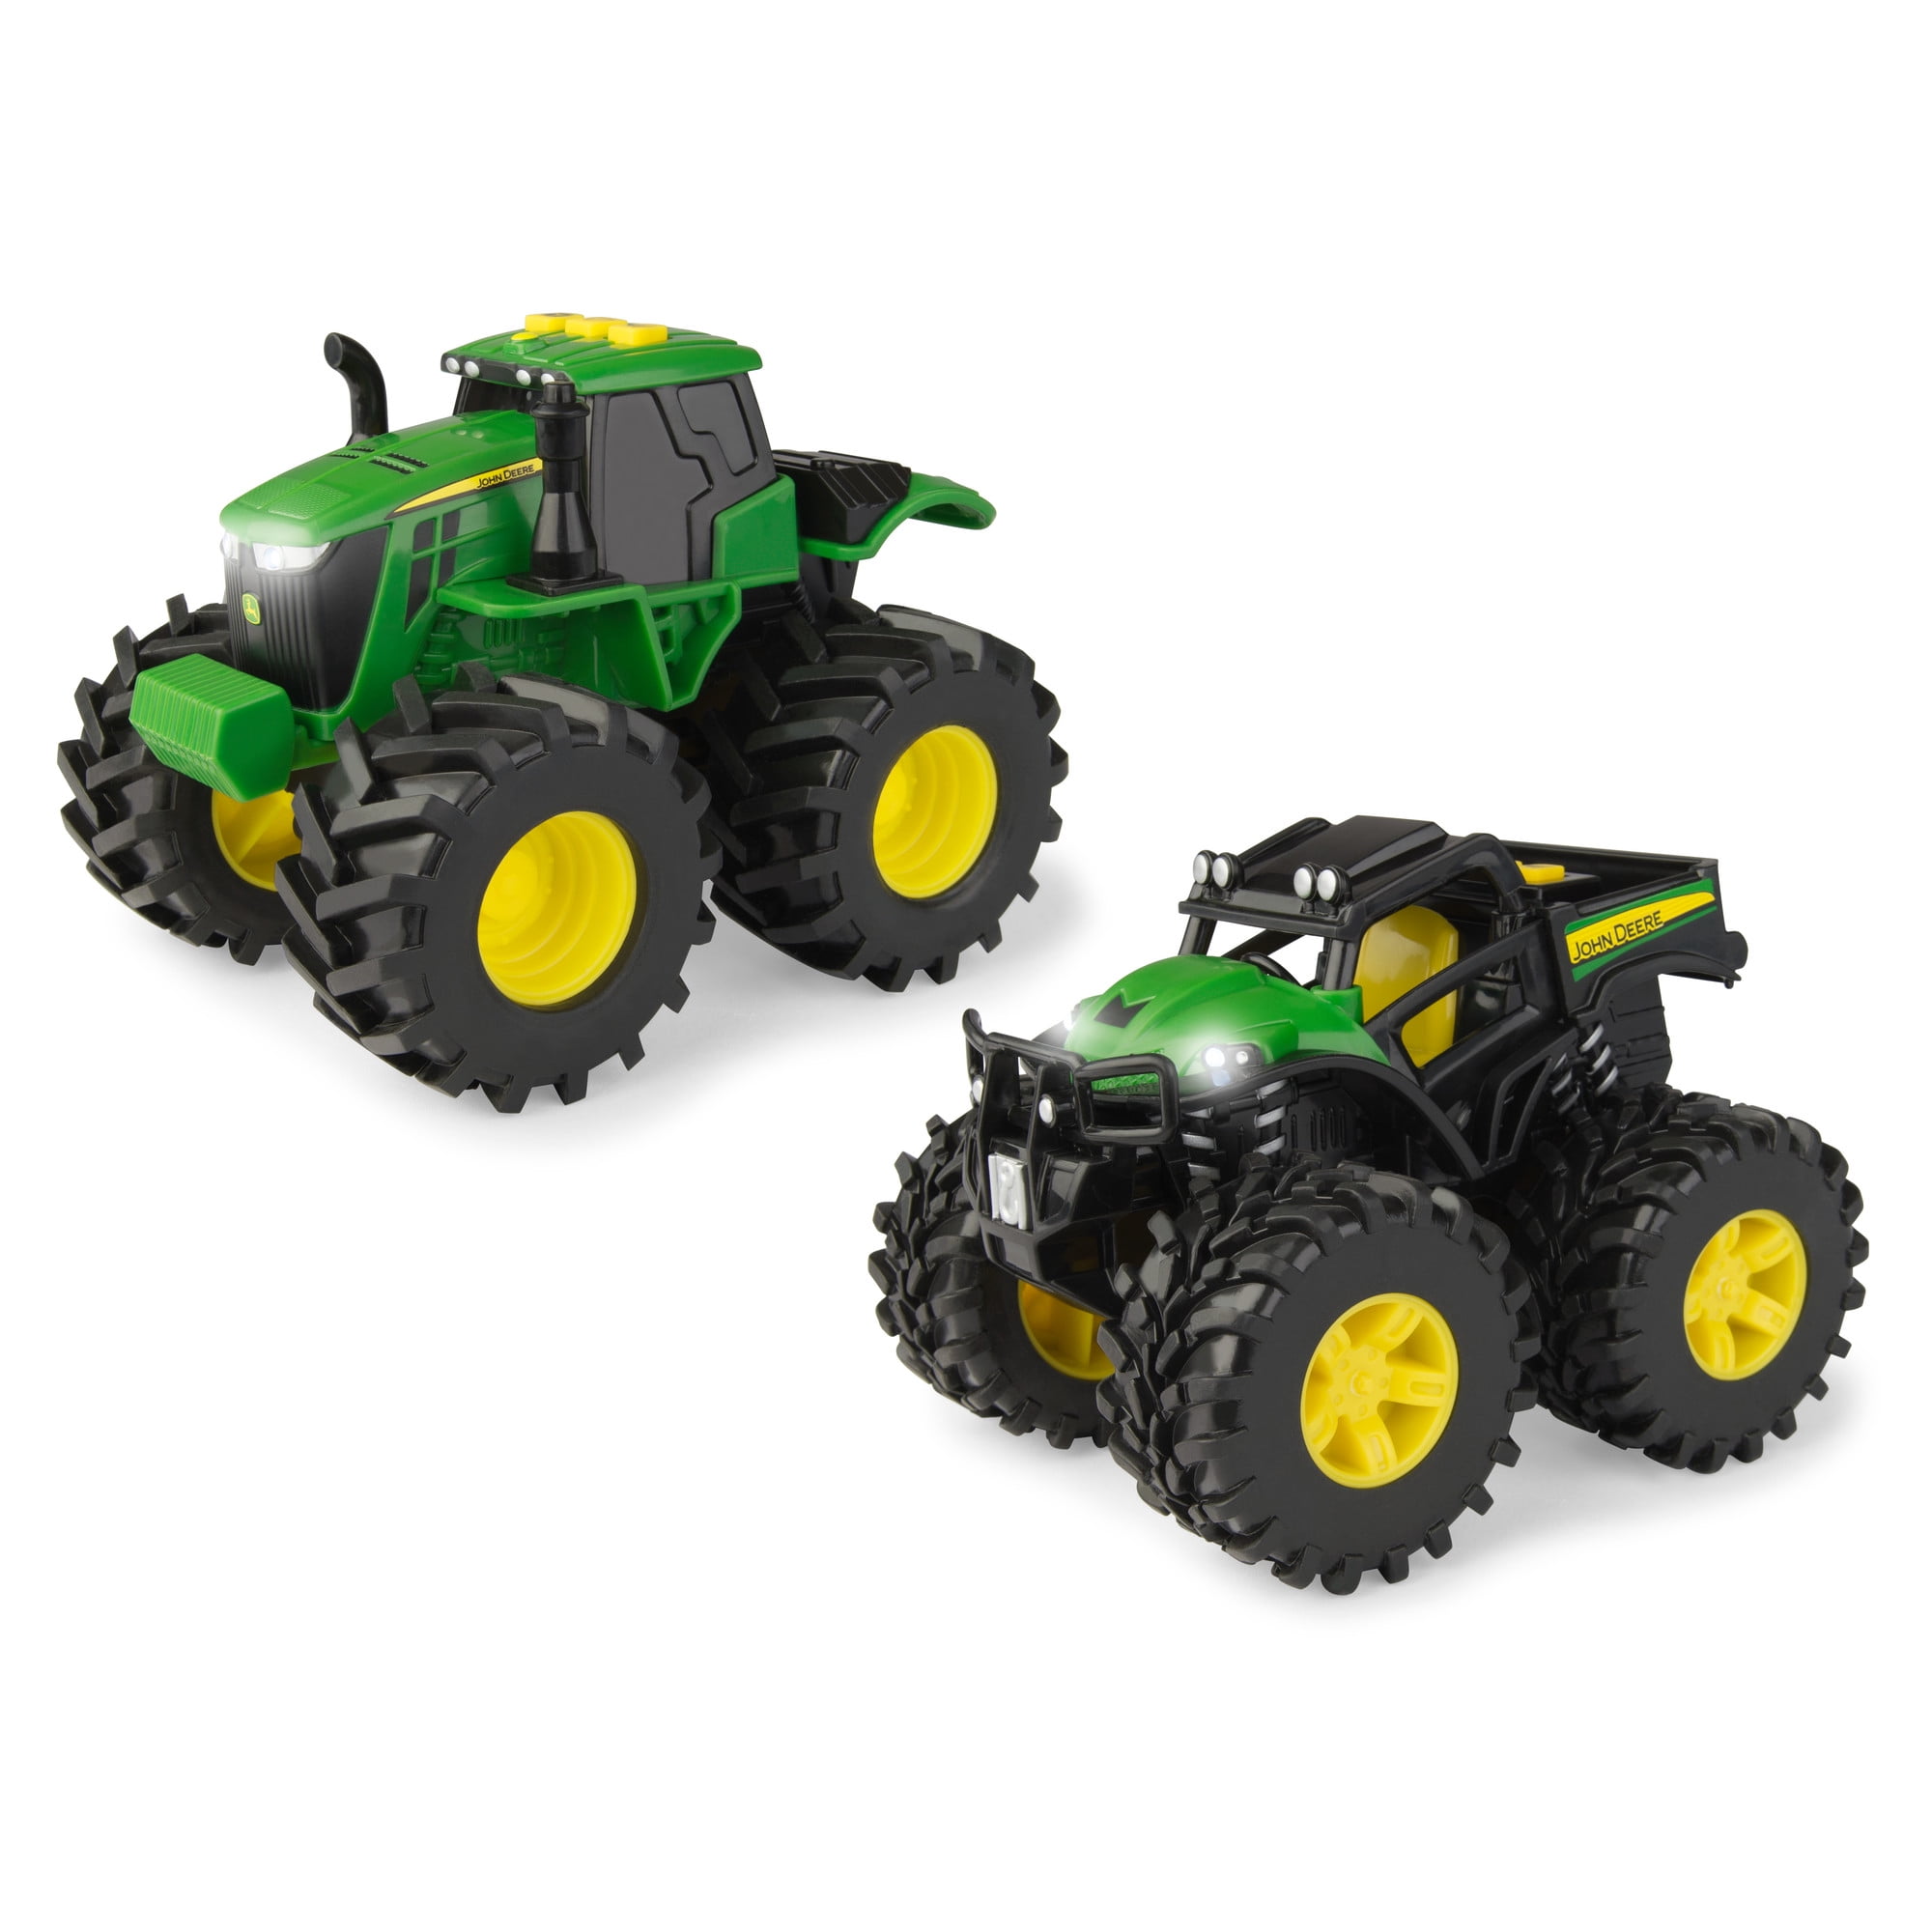 John Deere Monster Treads Lights and Sounds Tractor and Gator Gift Set -  